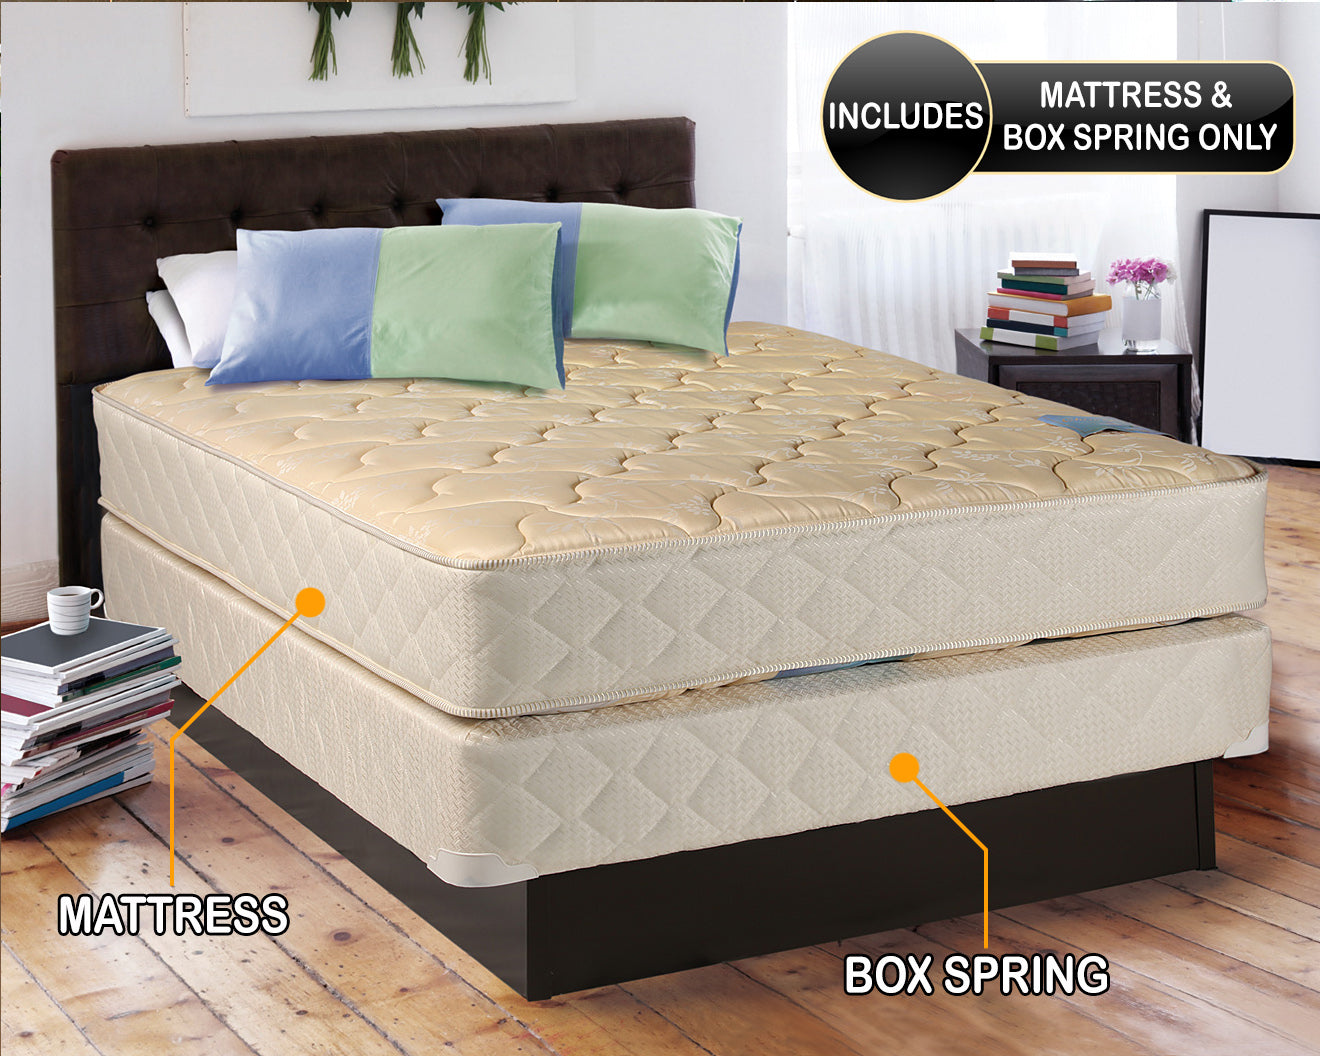 Chiro Premier Orthopedic (Beige) Full XL Size Mattress and Box Spring Set - Fully Assembled, Good for Your Back, Long Lasting and 2 Sided